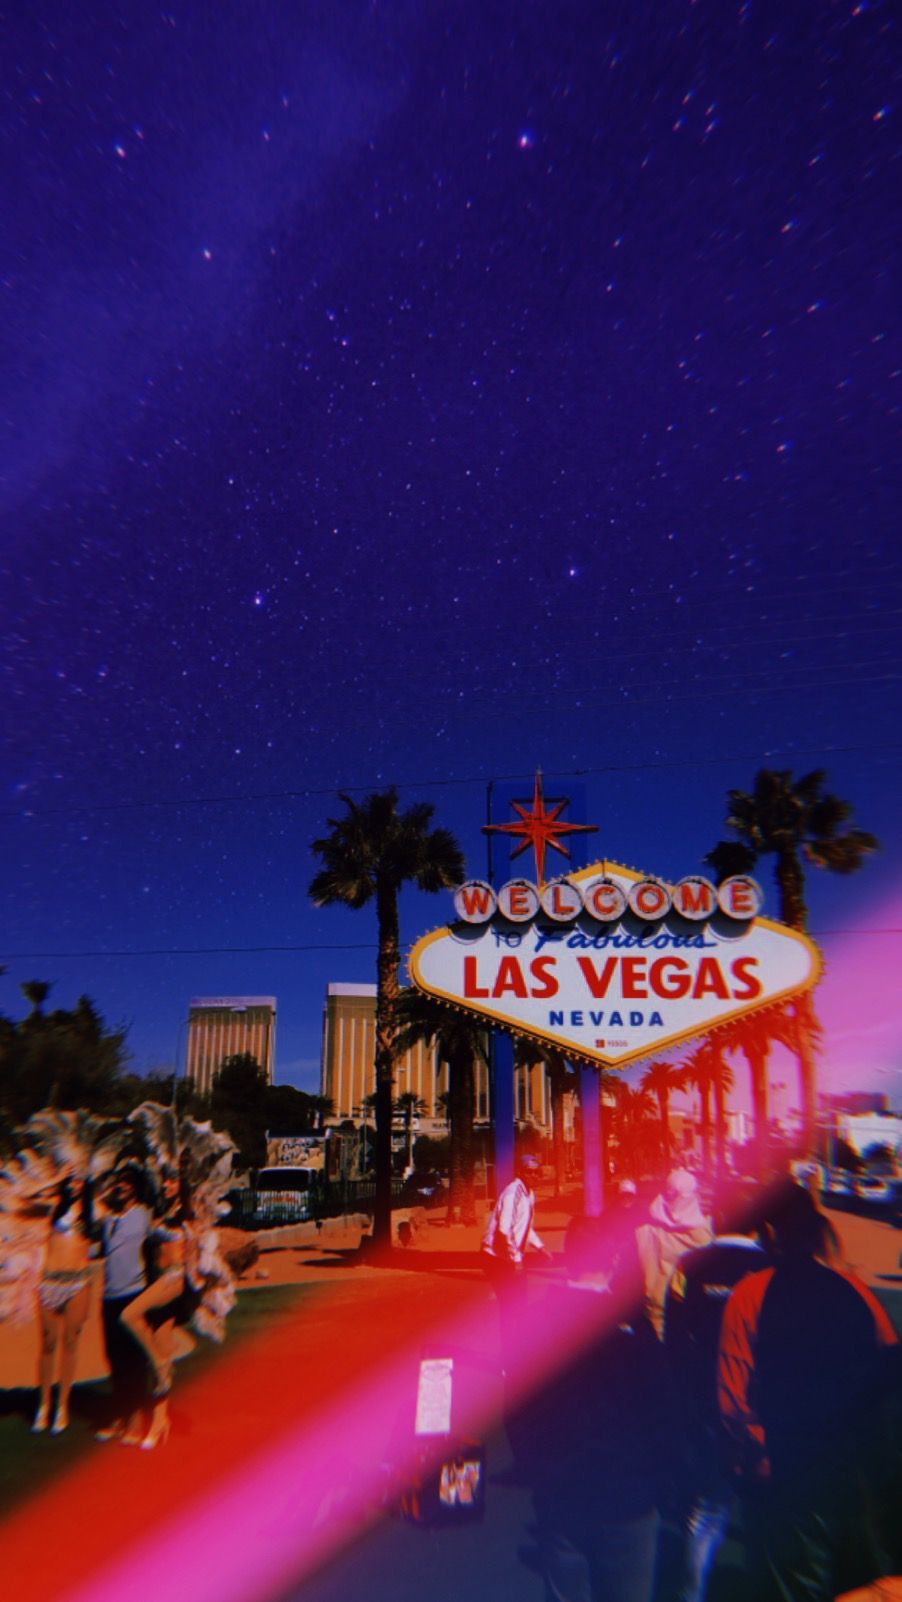 Las Vegas sign at night with a pink and blue filter - Las Vegas